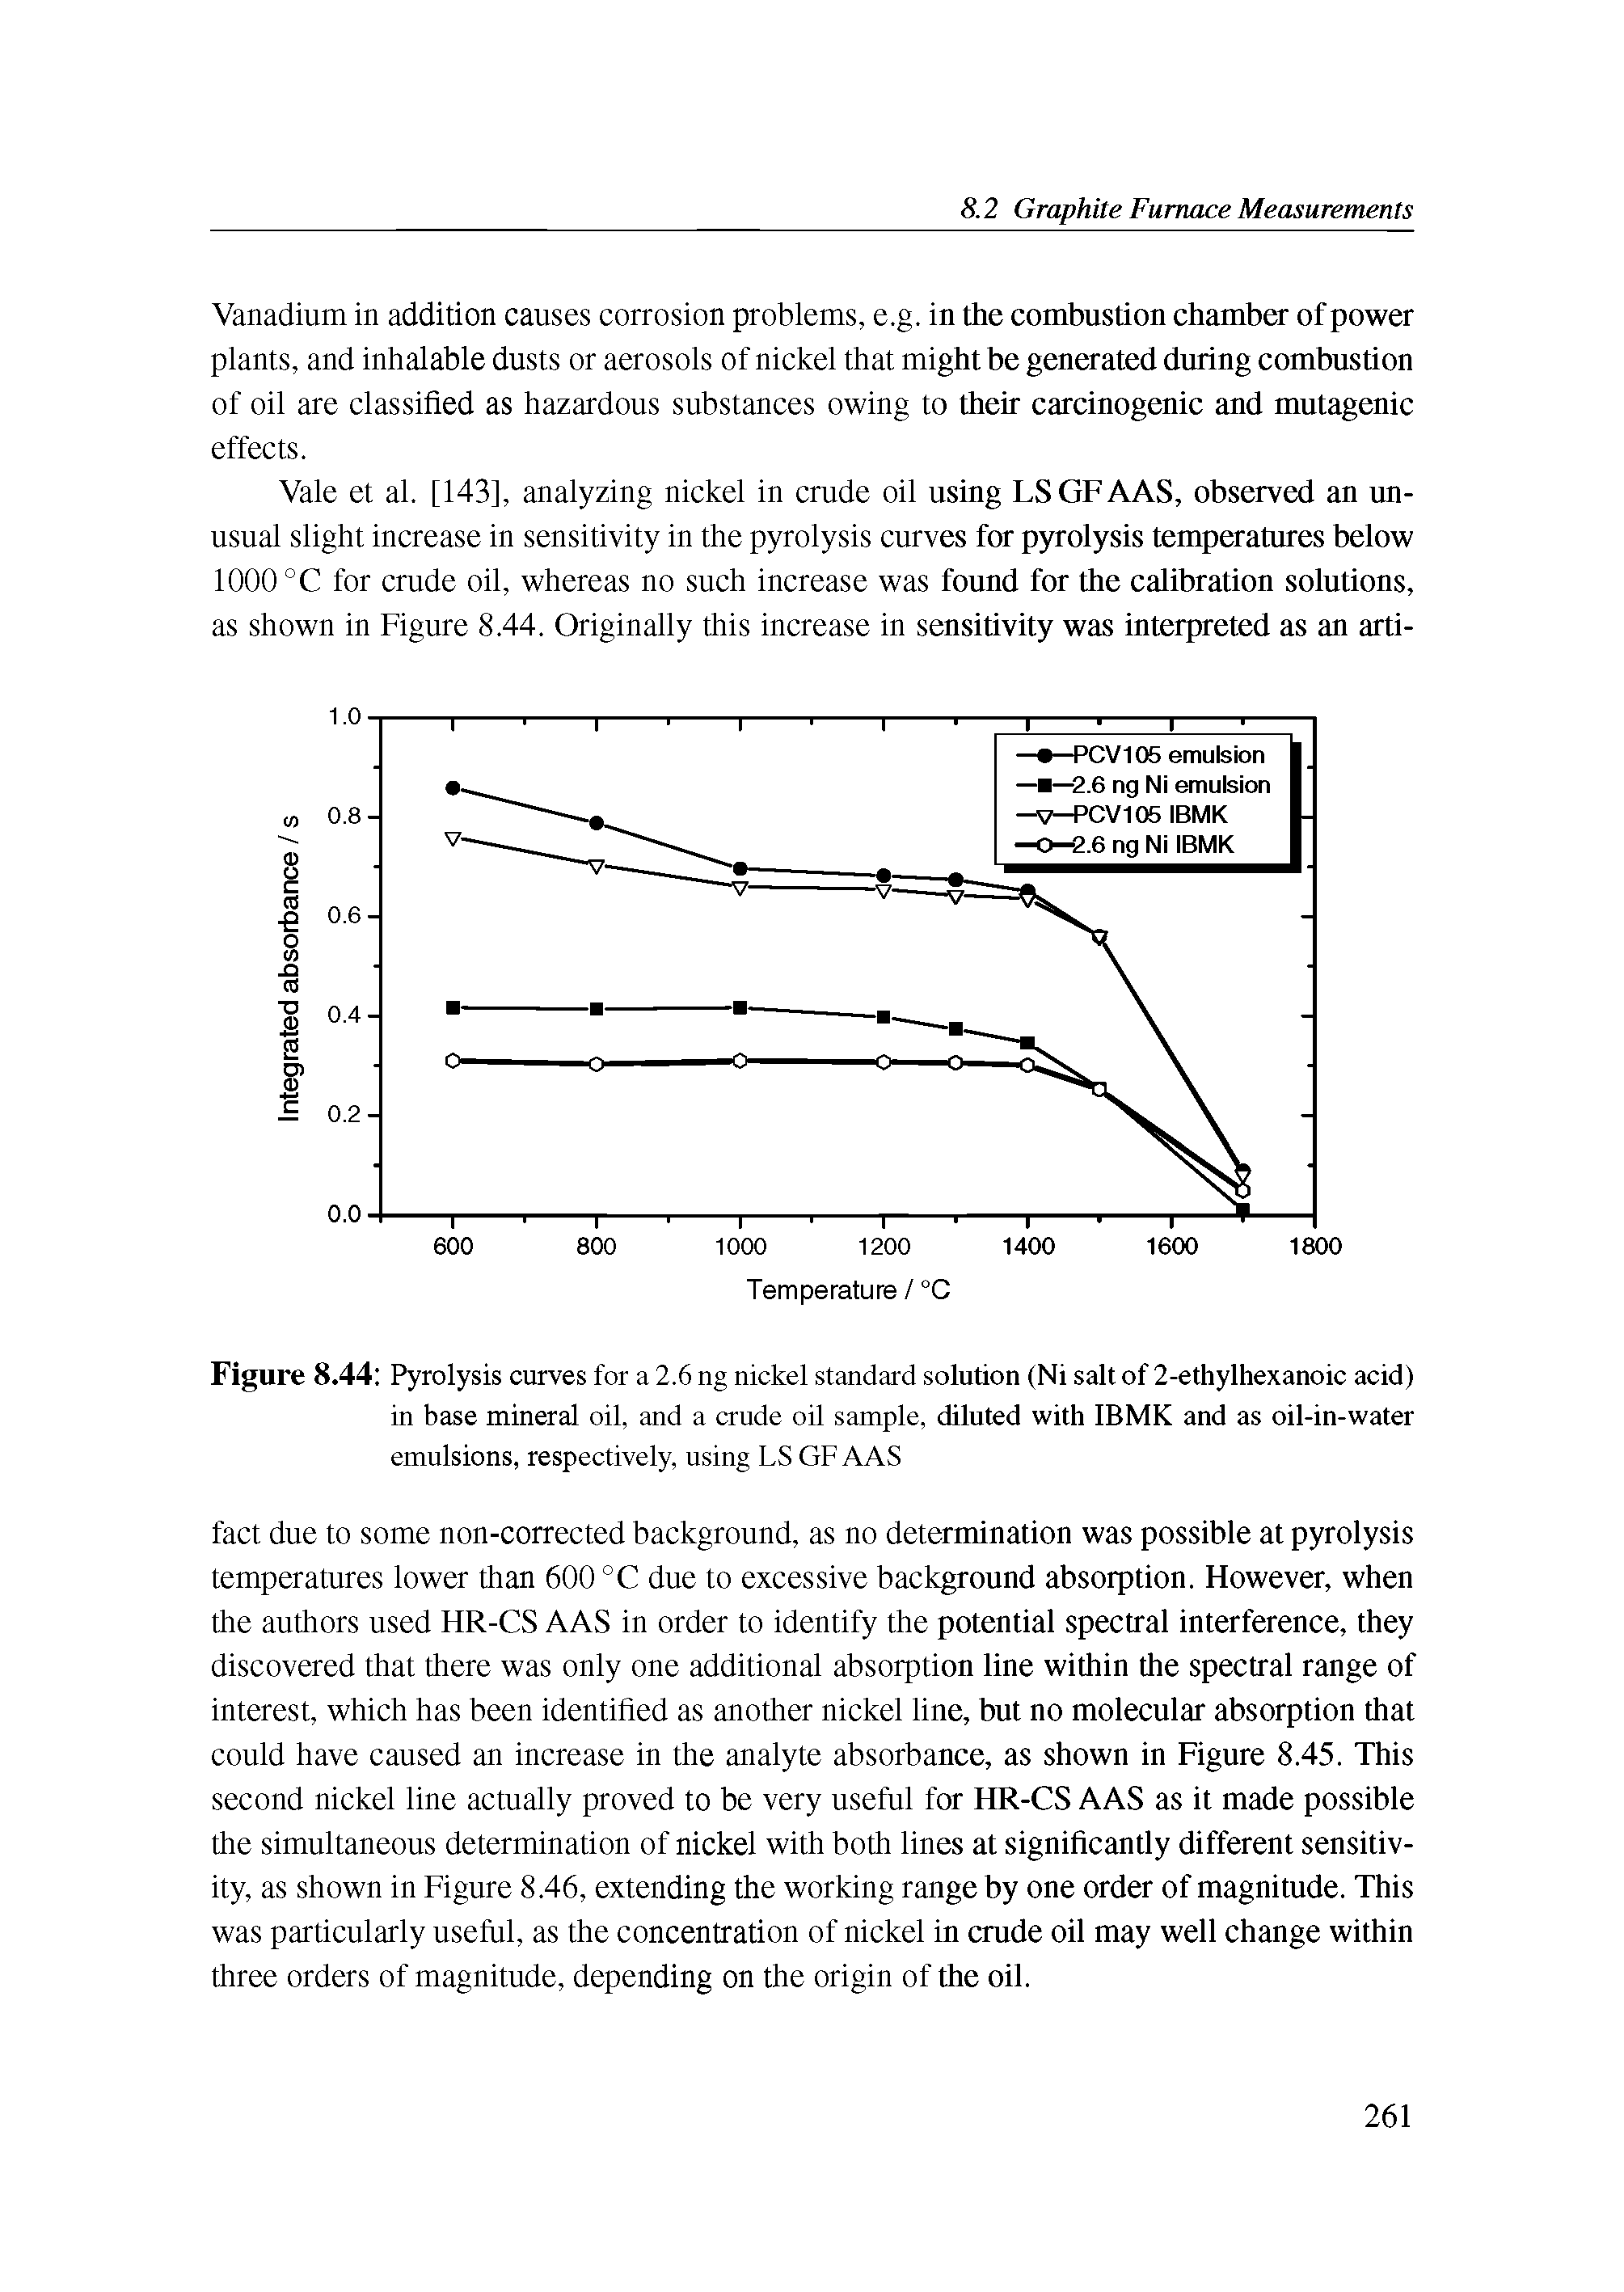 Figure 8.44 Pyrolysis curves for a 2.6 ng nickel standard solution (Ni salt of 2-ethylhexanoic acid) in base mineral oil, and a crude oil sample, diluted with IBMK and as oil-in-water emulsions, respectively, using LS GF AAS...